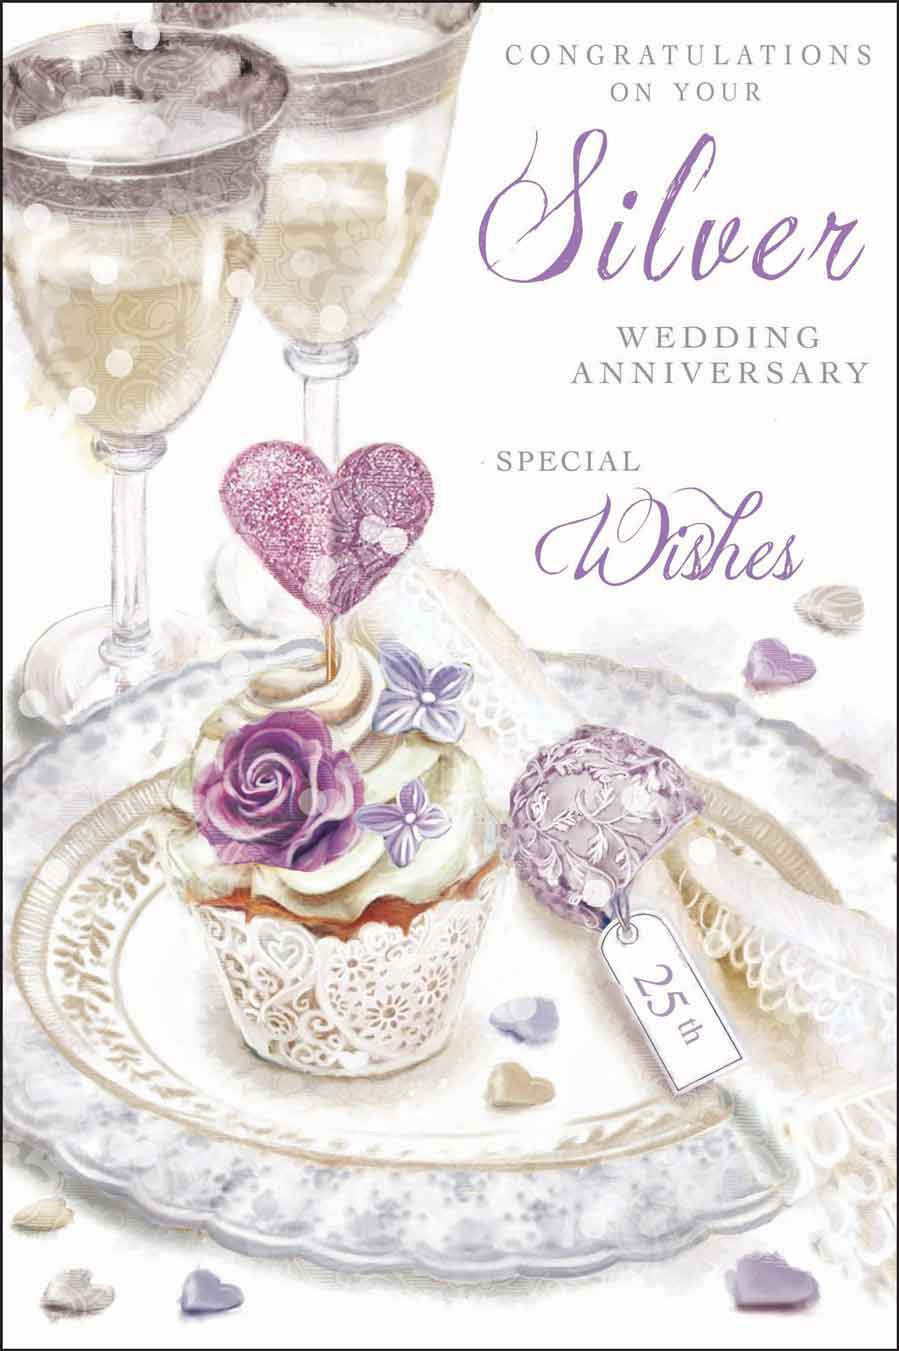 25th Wedding Anniversary Card -  Champagne, Cake Knife, And Platter 